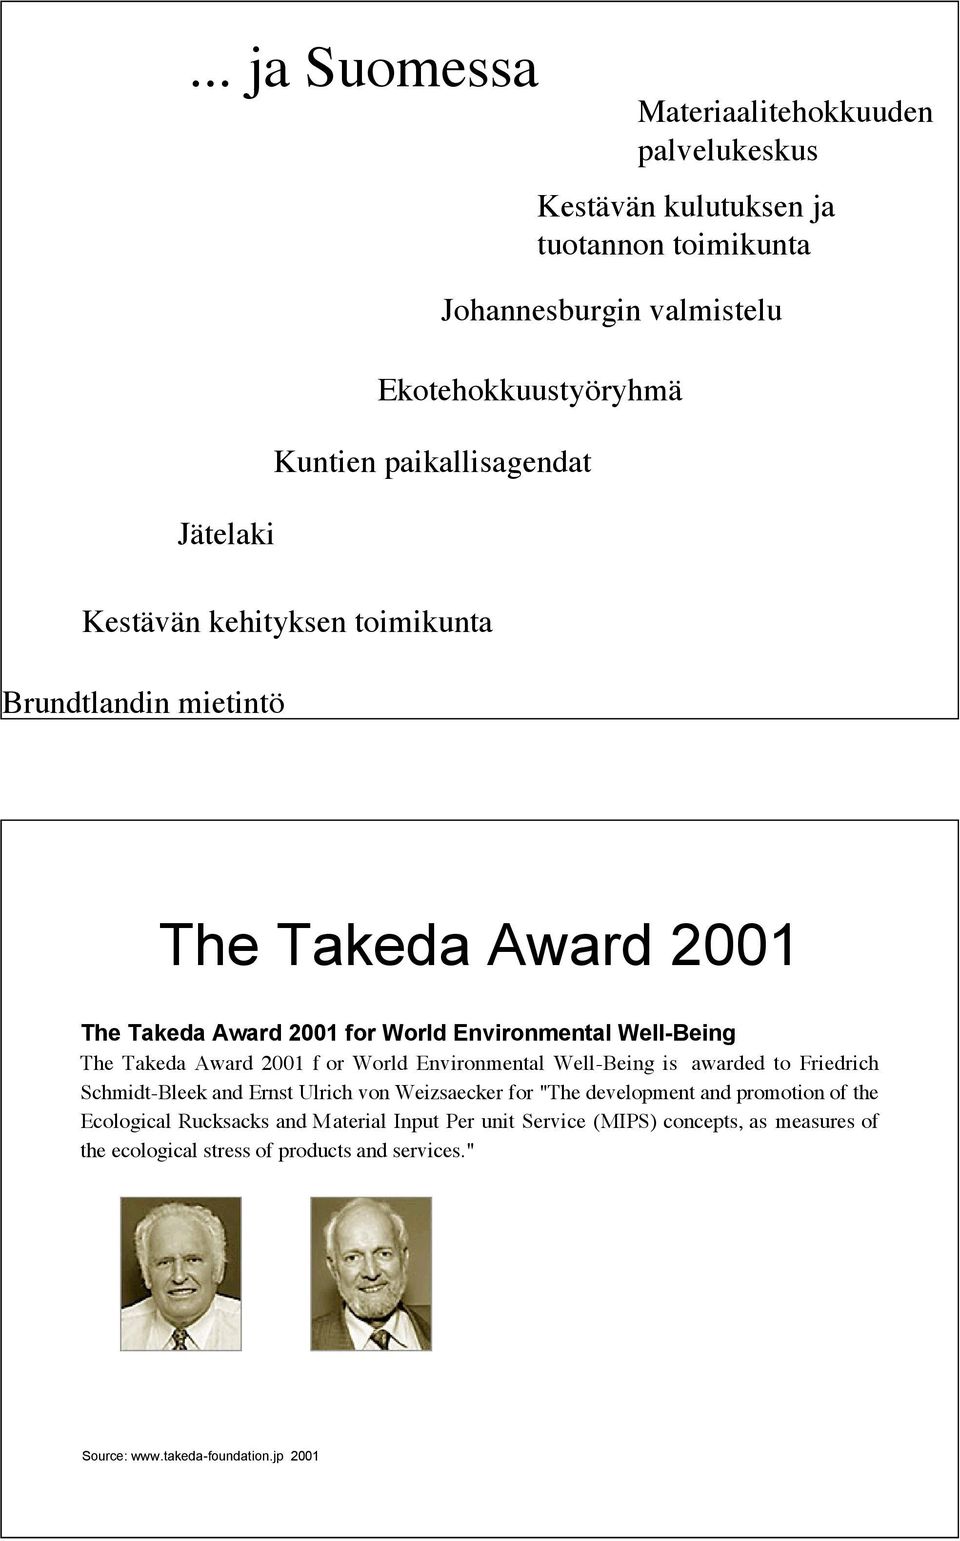 Award 2001 f or World Environmental Well-Being is awarded to Friedrich Schmidt-Bleek and Ernst Ulrich von Weizsaecker for "The development and promotion of the